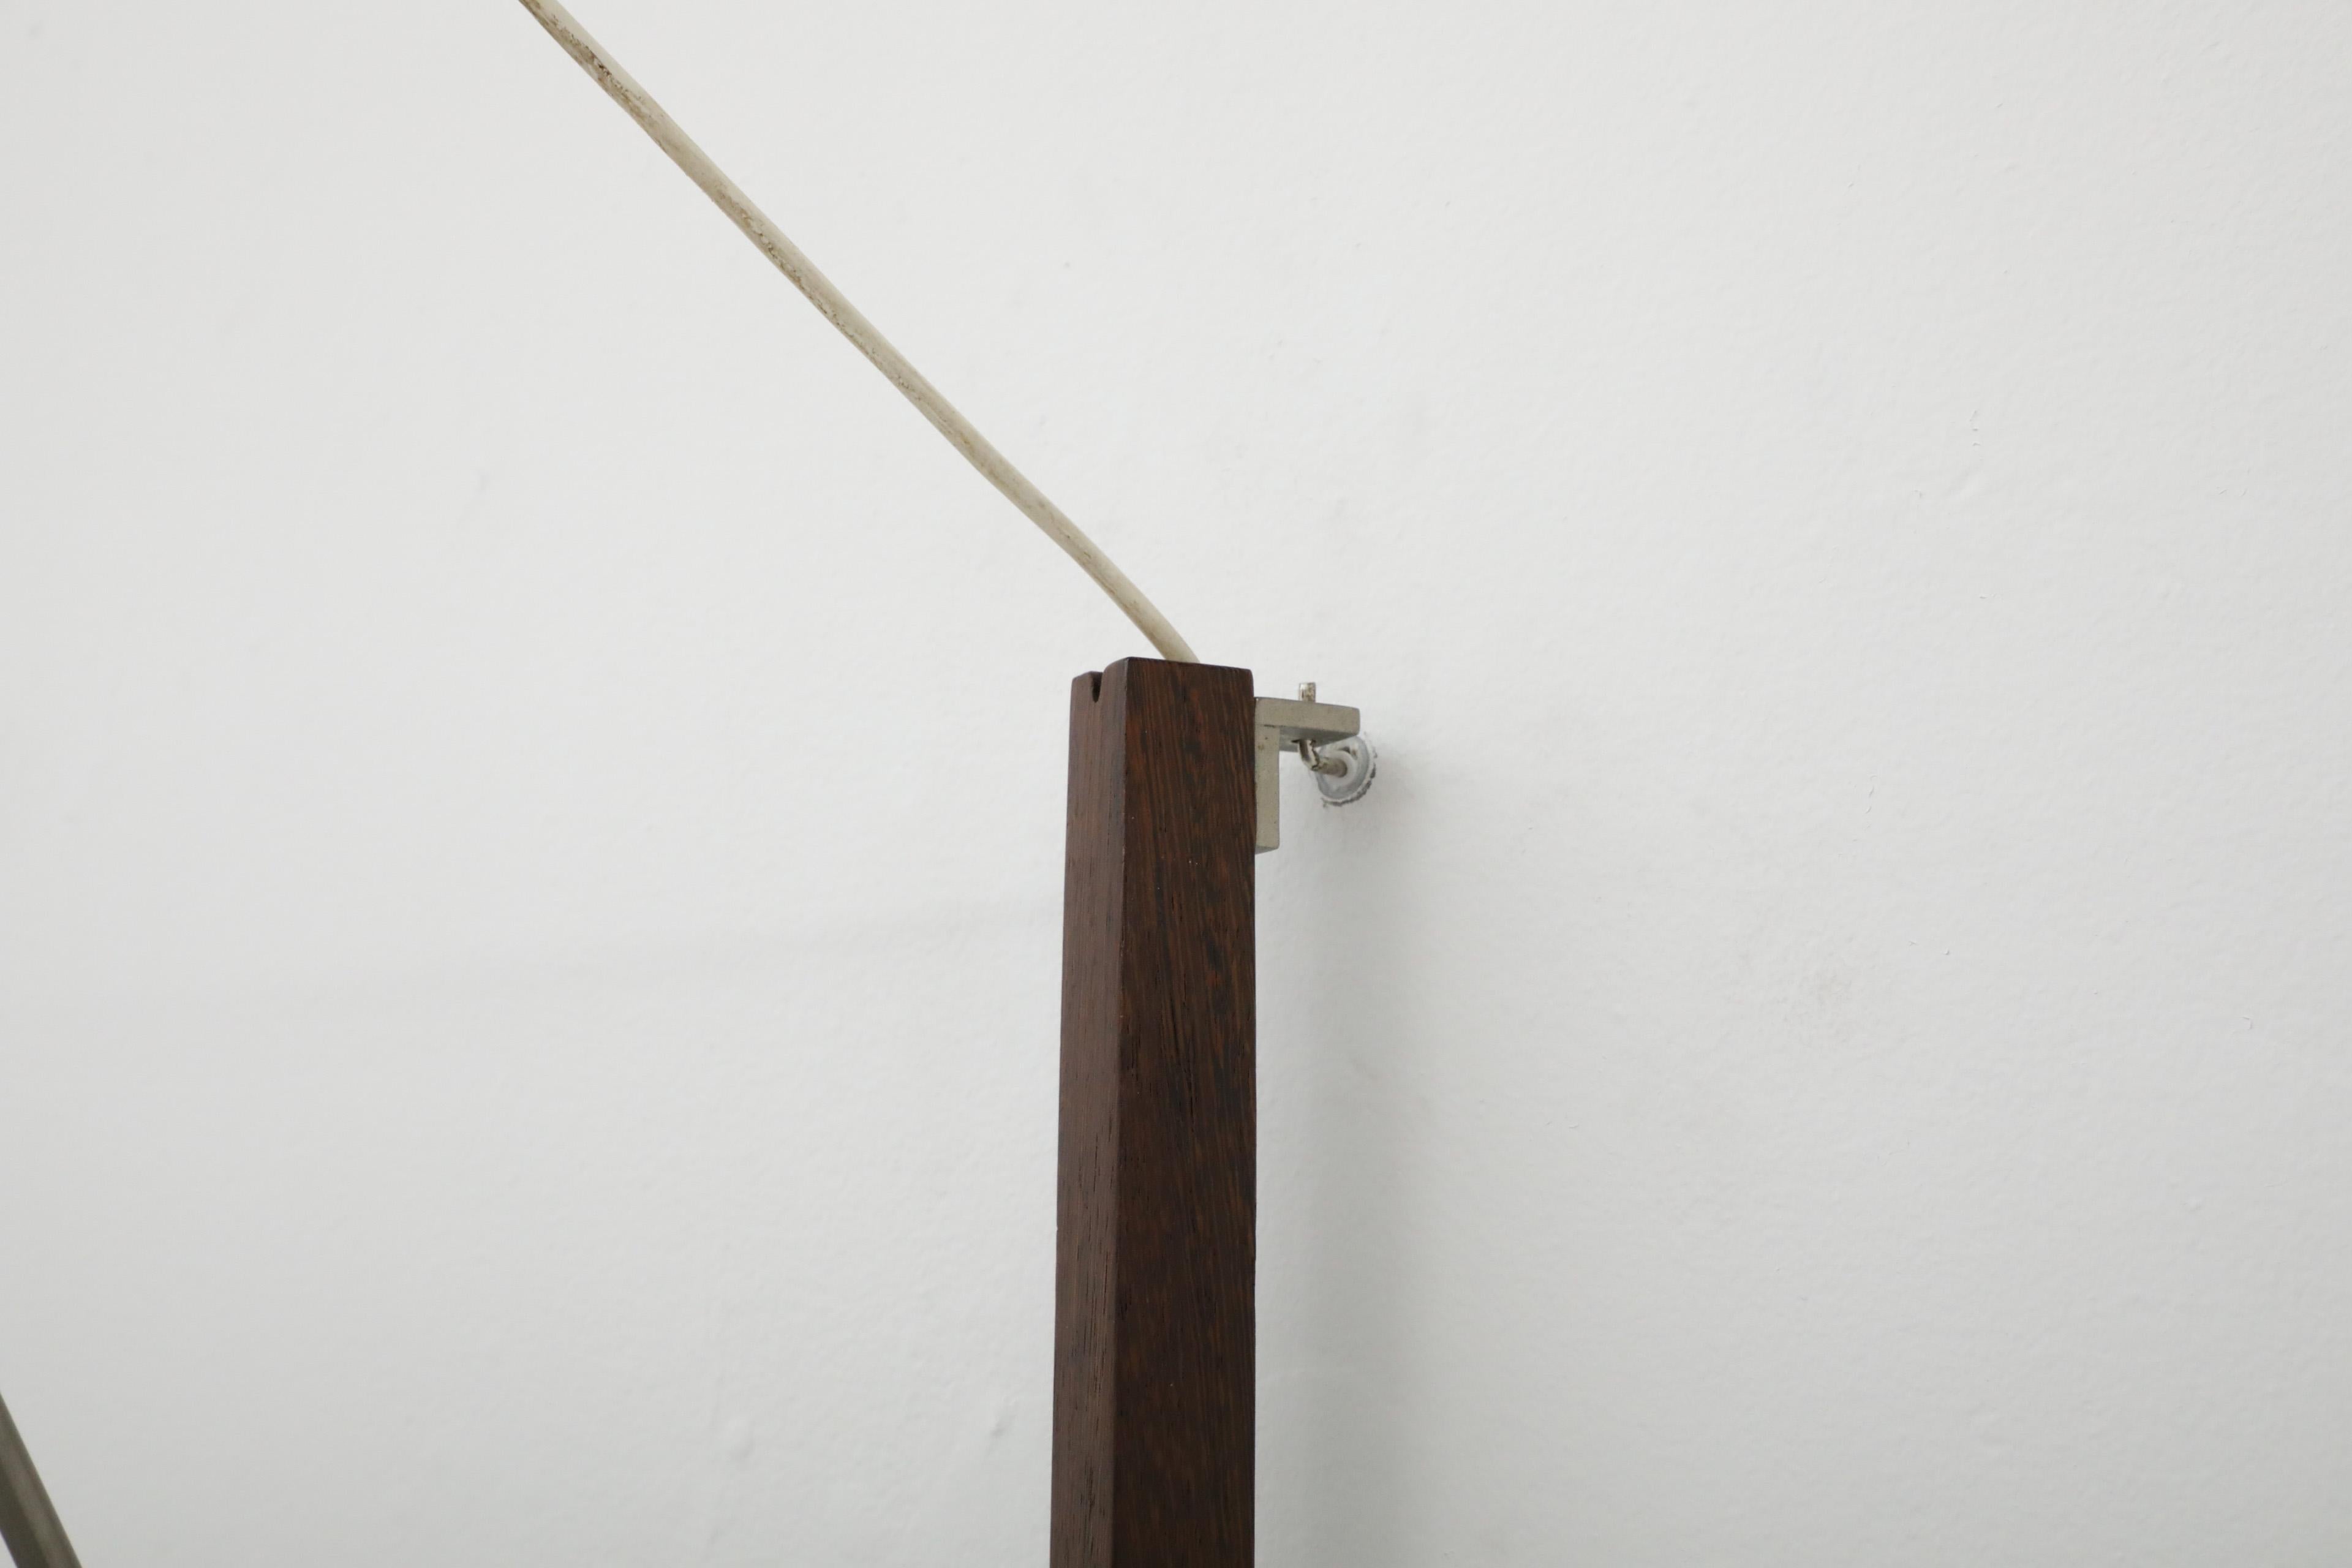 Rare Willem Hagoort Wall Sconce w/ White Enameled Metal Cone Shade & Teak Mount For Sale 12